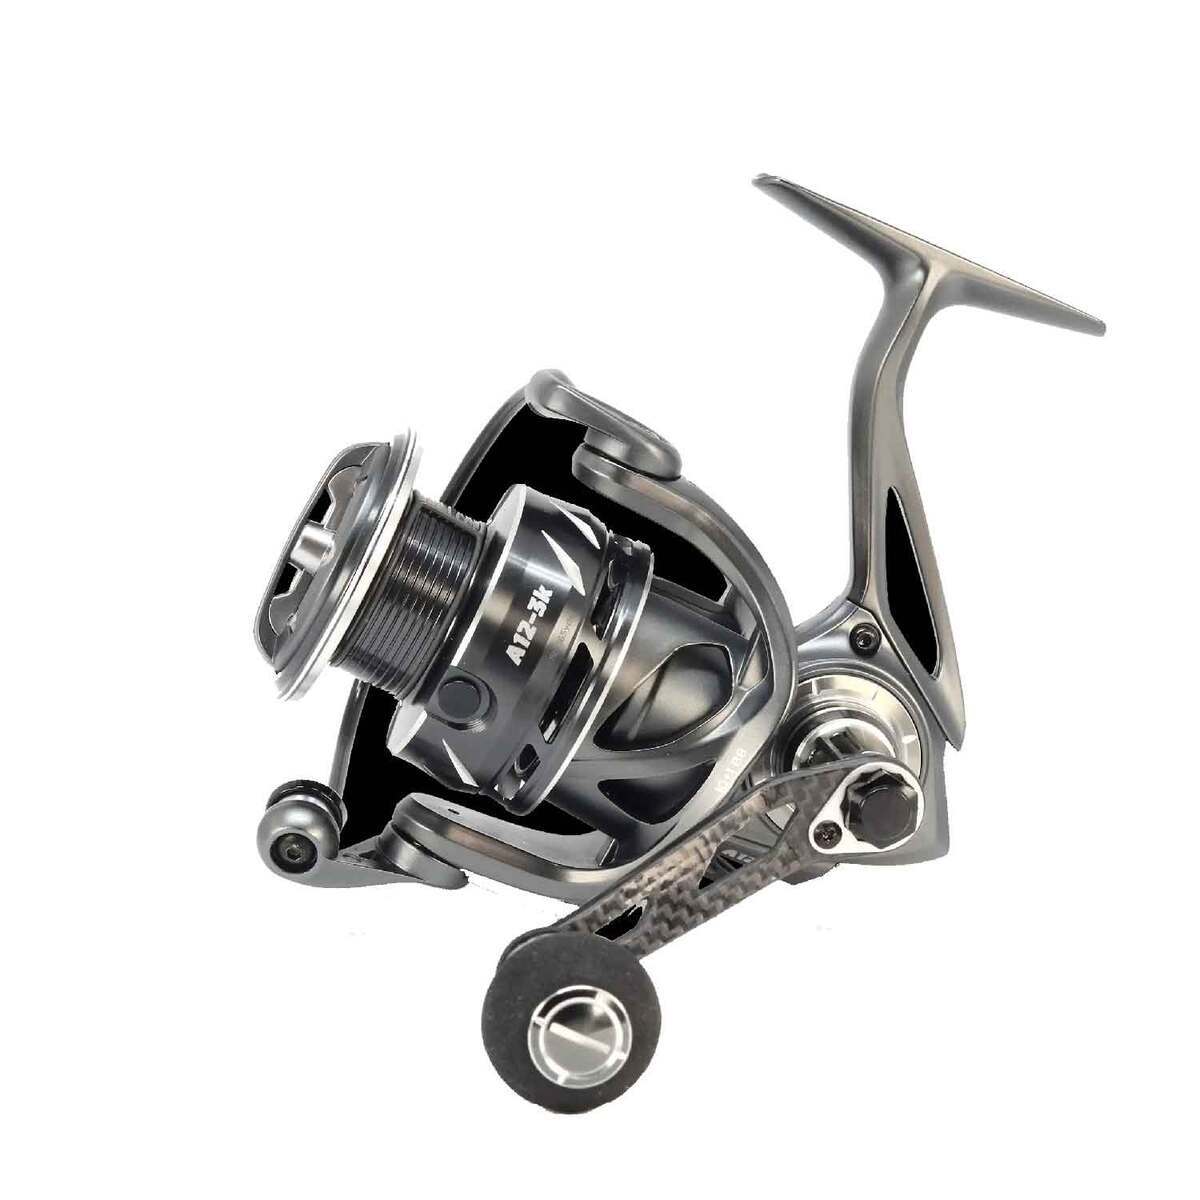 ProFISHiency A12 Charcoal and Silver Spinning Fishing Reel - 3000